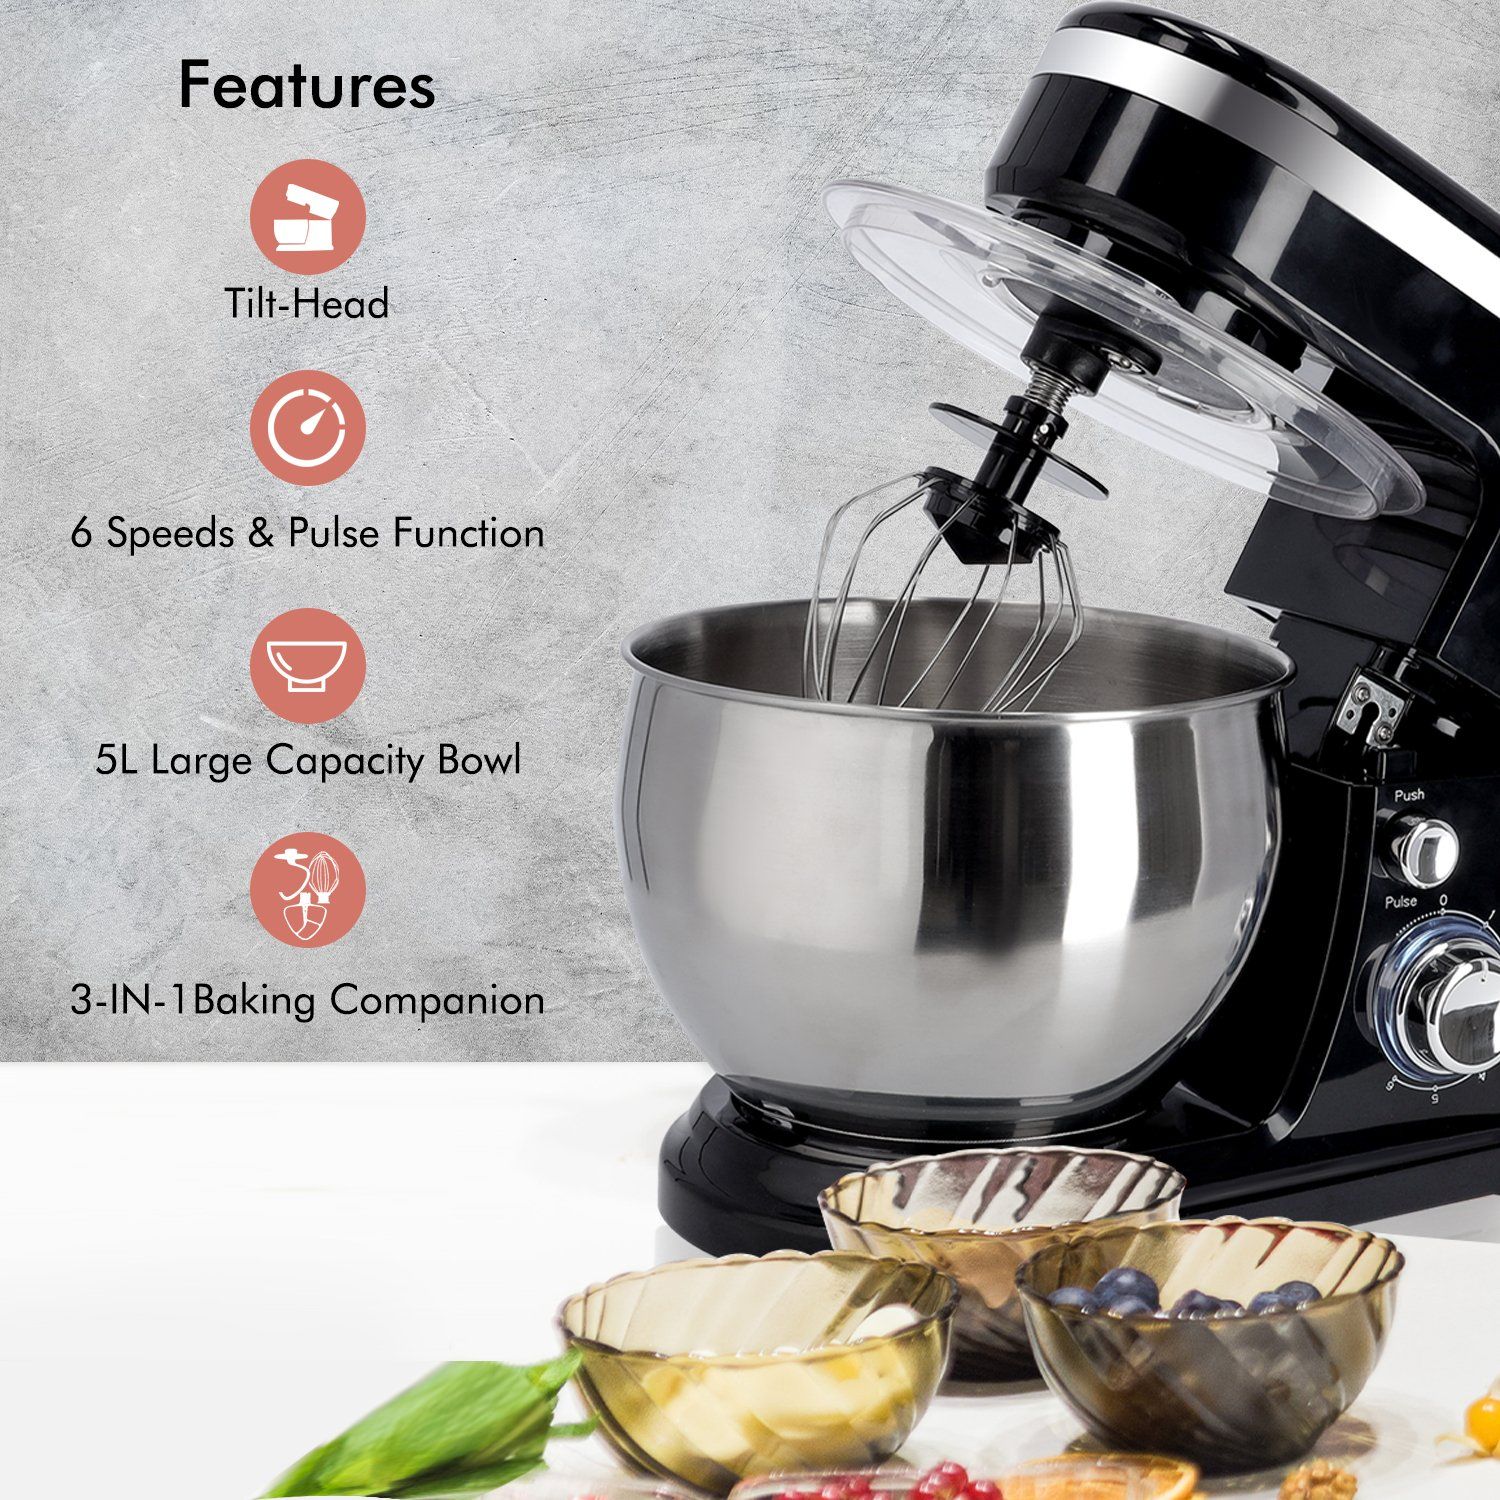 1000W Food Stand Mixer Mixer Geepas | For you. For life. 